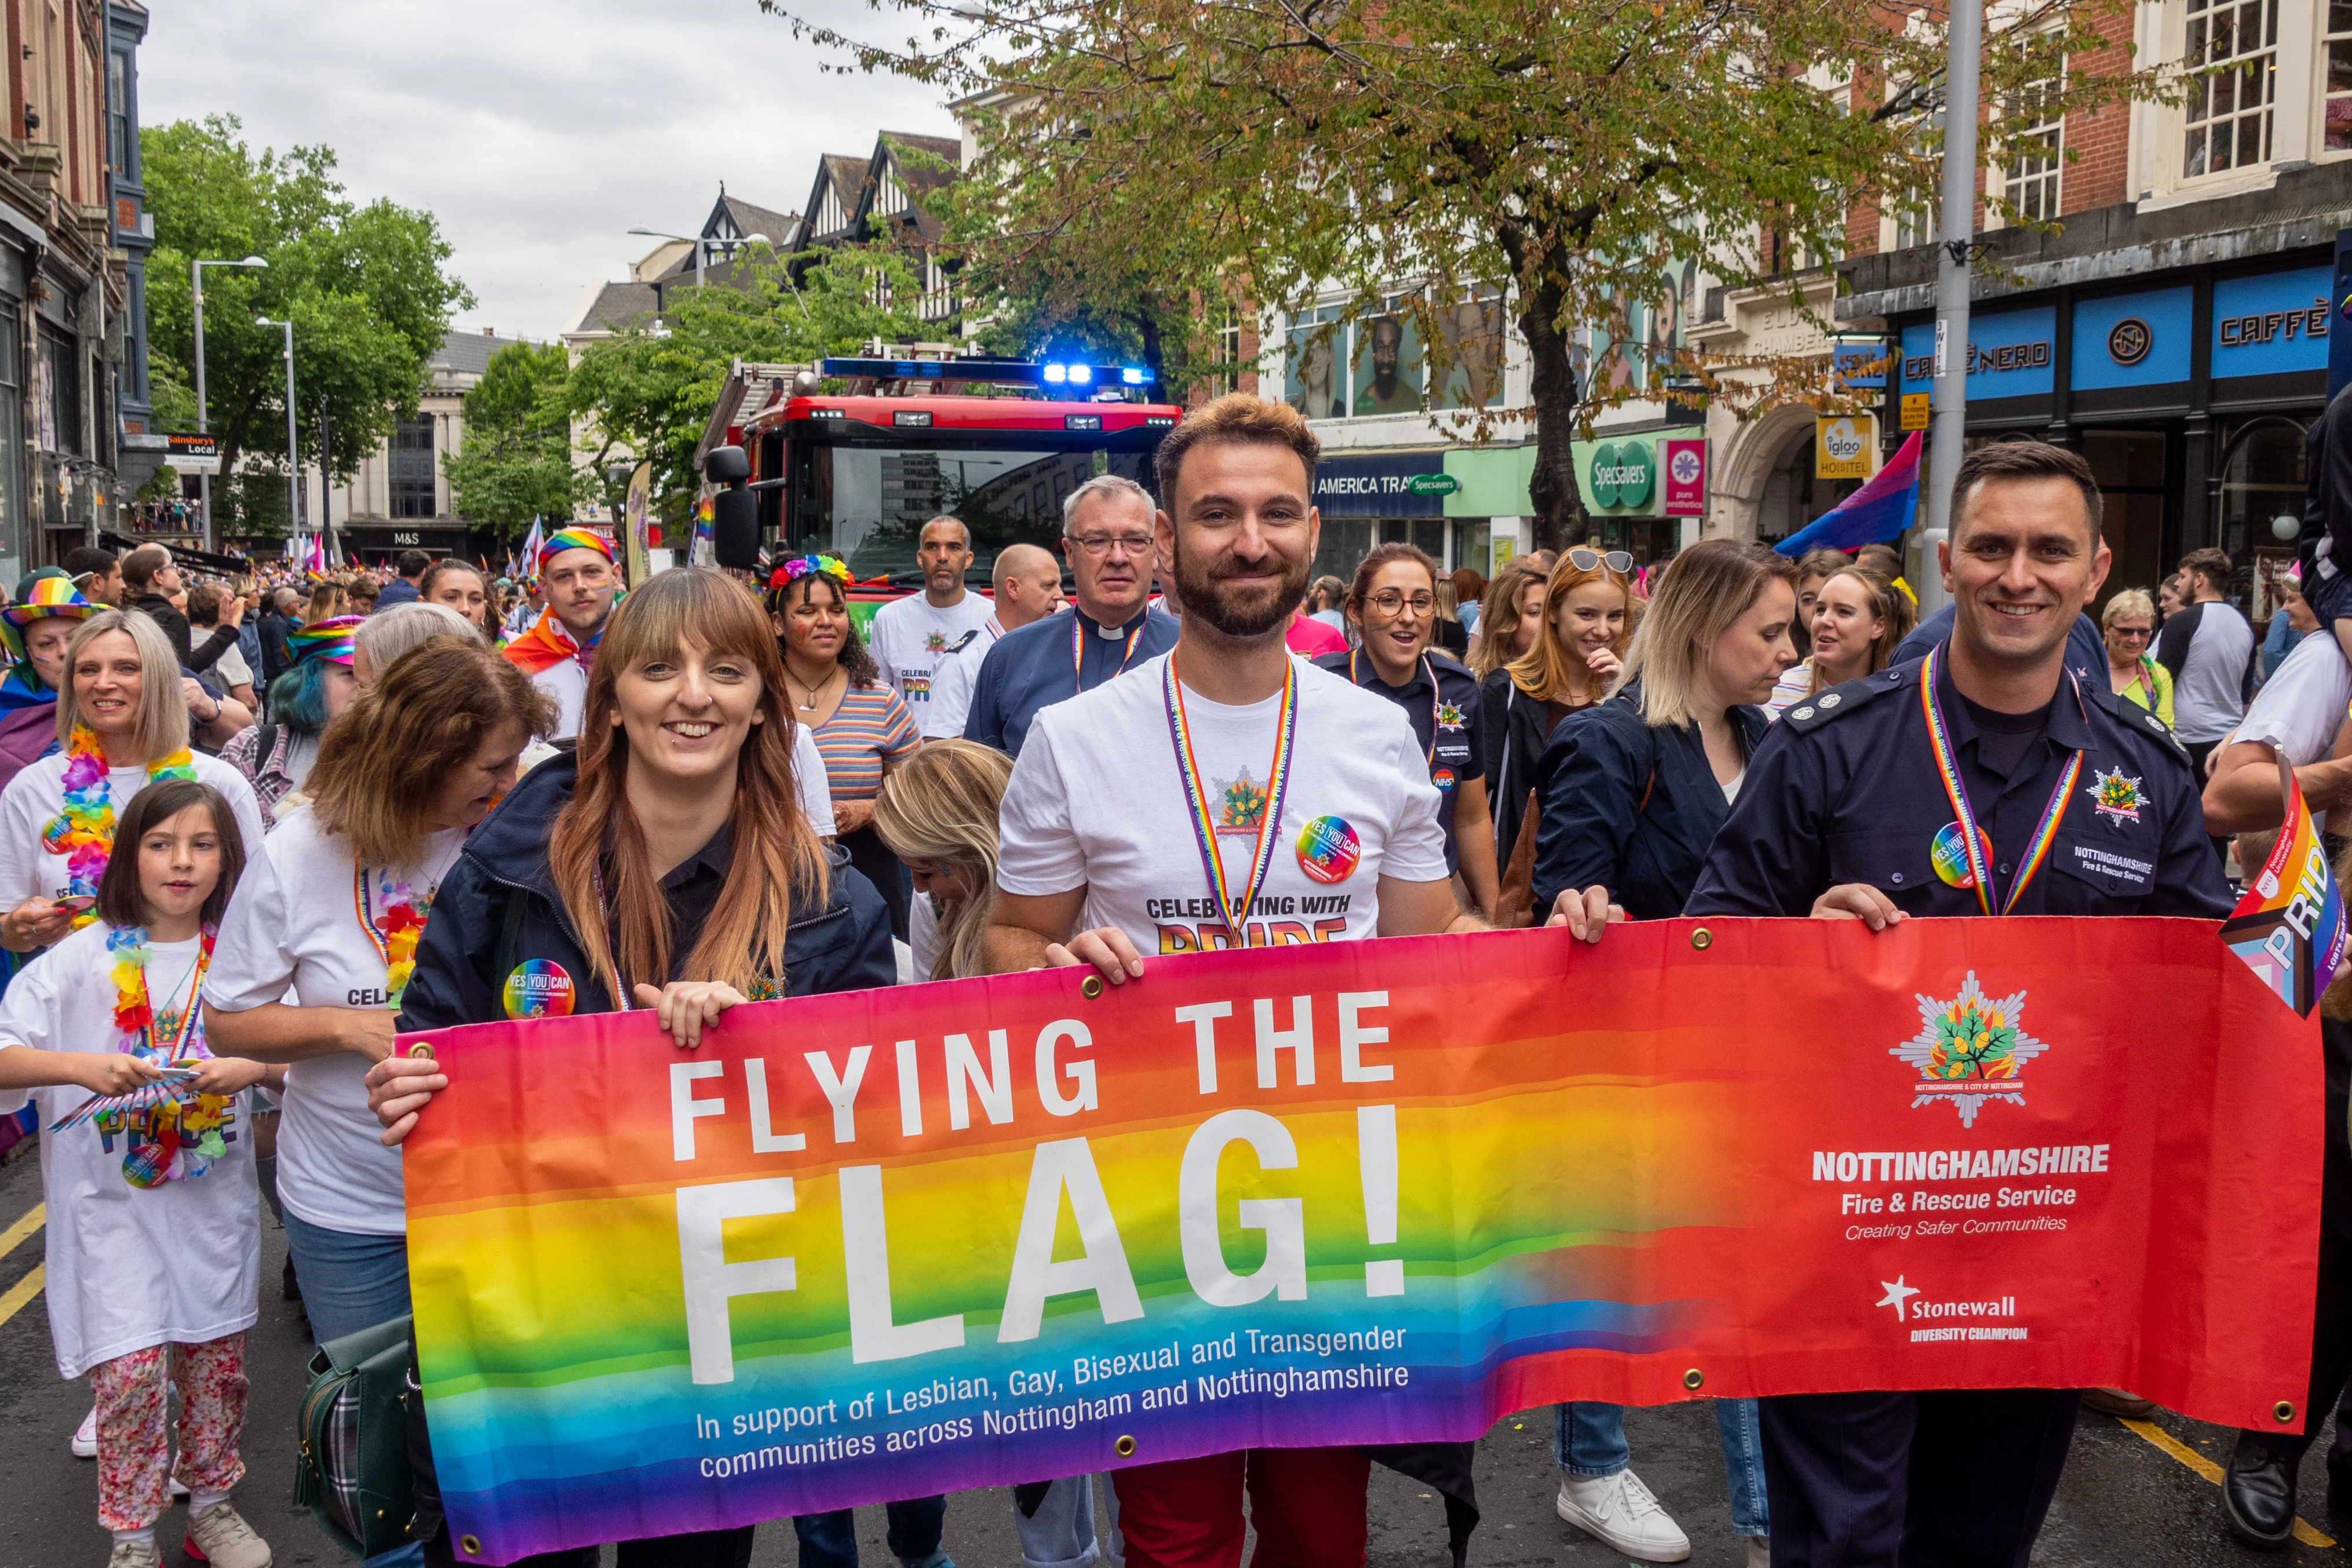 Nottinghamshire Fire and Rescue Service staff taking part in Nottingham Pride parade holding a large flag in rainbow colours